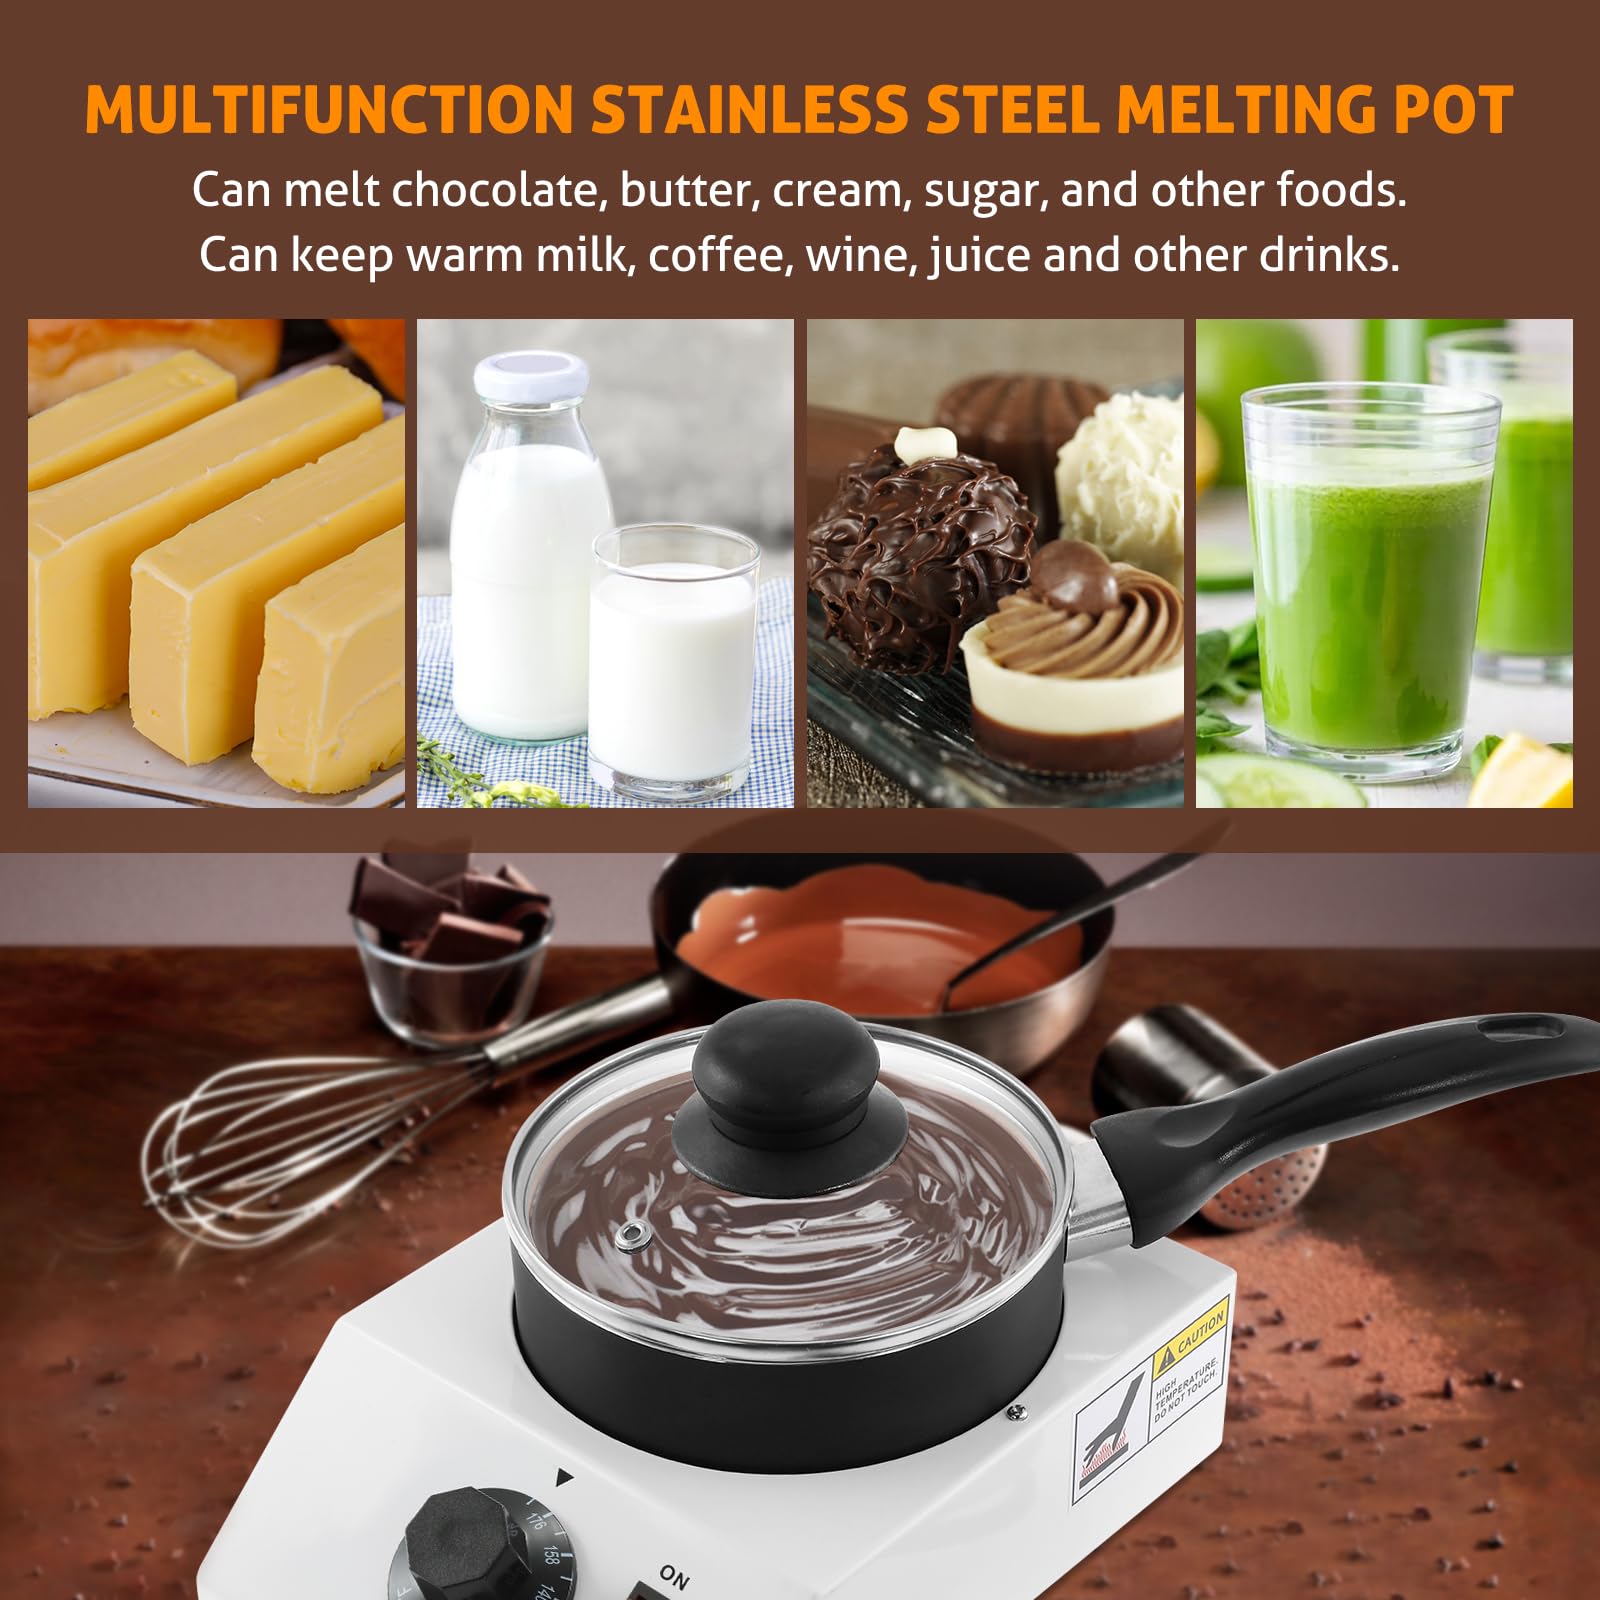 WICHEMI Chocolate Melting Pot Chocolate Tempering Machine Commercial Electric Chocolate Melter Fondue Pot for Chocolate, Butter,